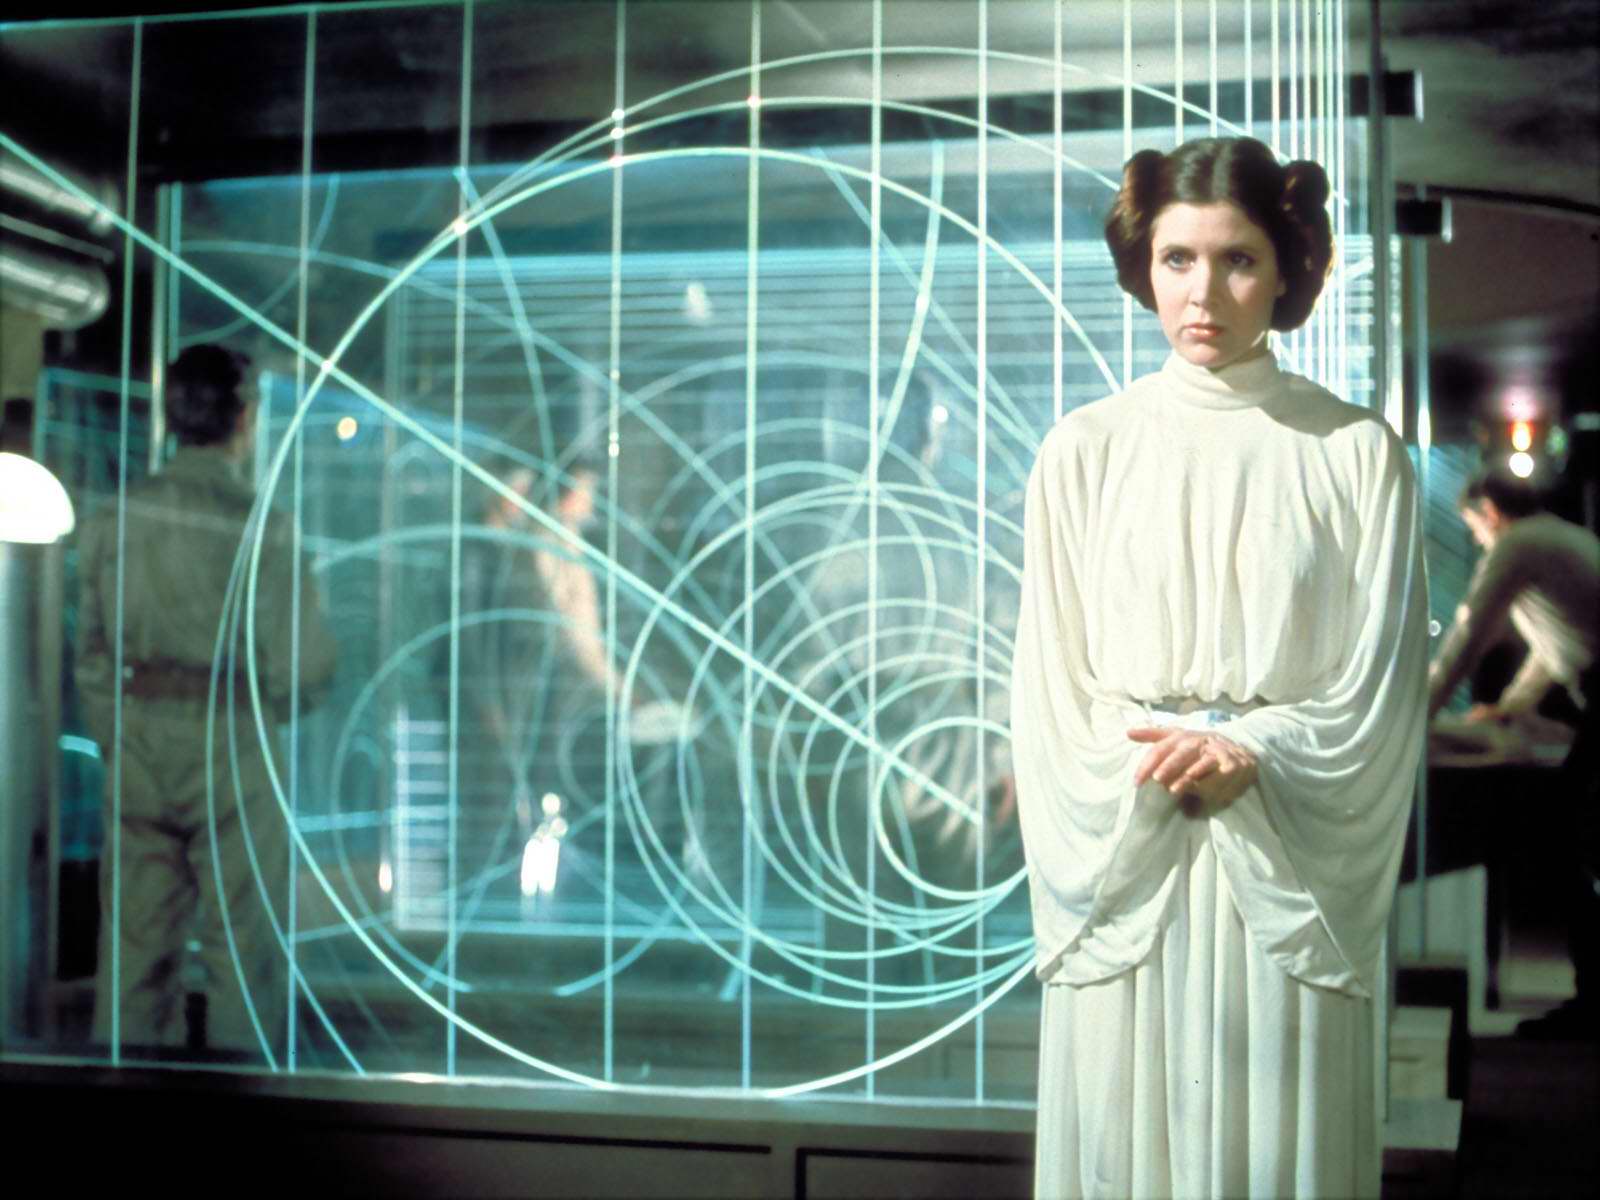 Lock Screen PC Wallpaper movie, star wars episode iv: a new hope, carrie fisher, princess leia, star wars